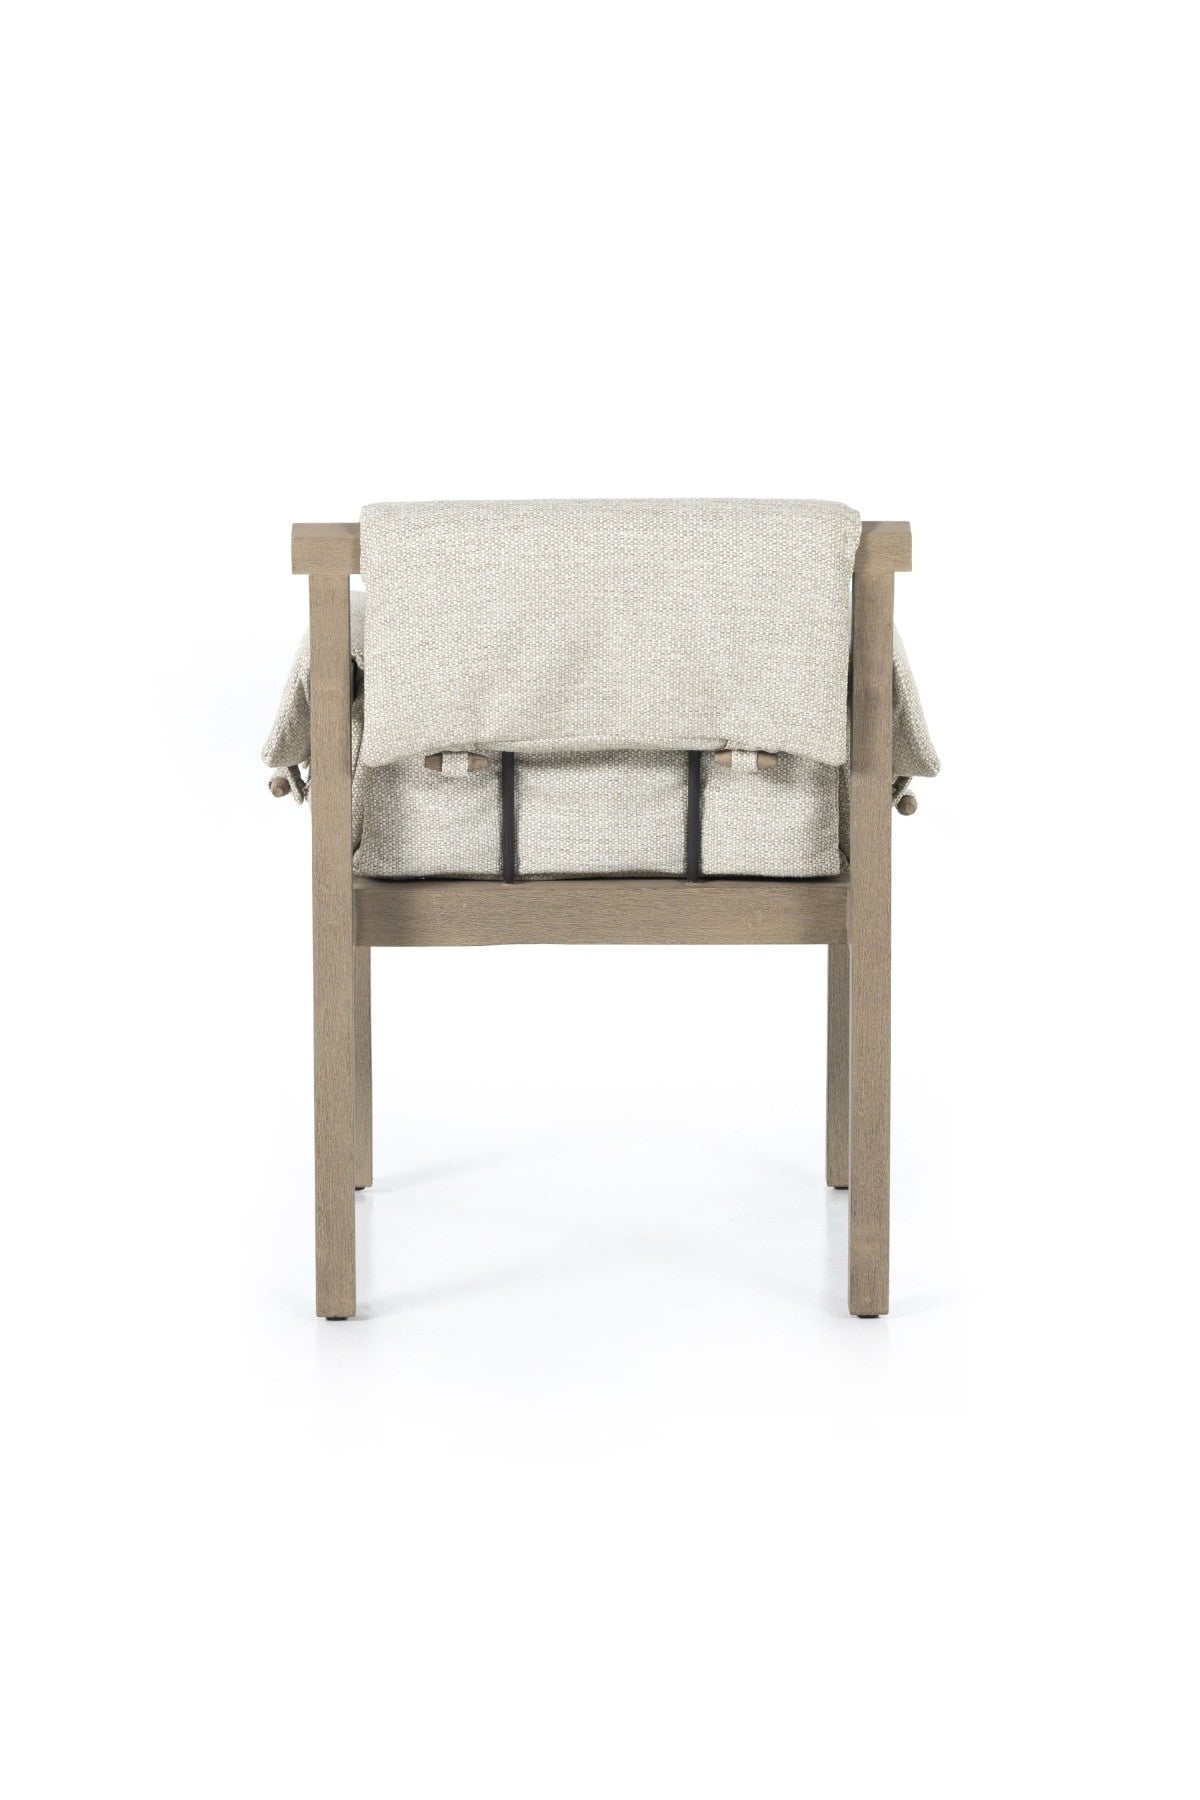 Galloway Outdoor Dining Chair